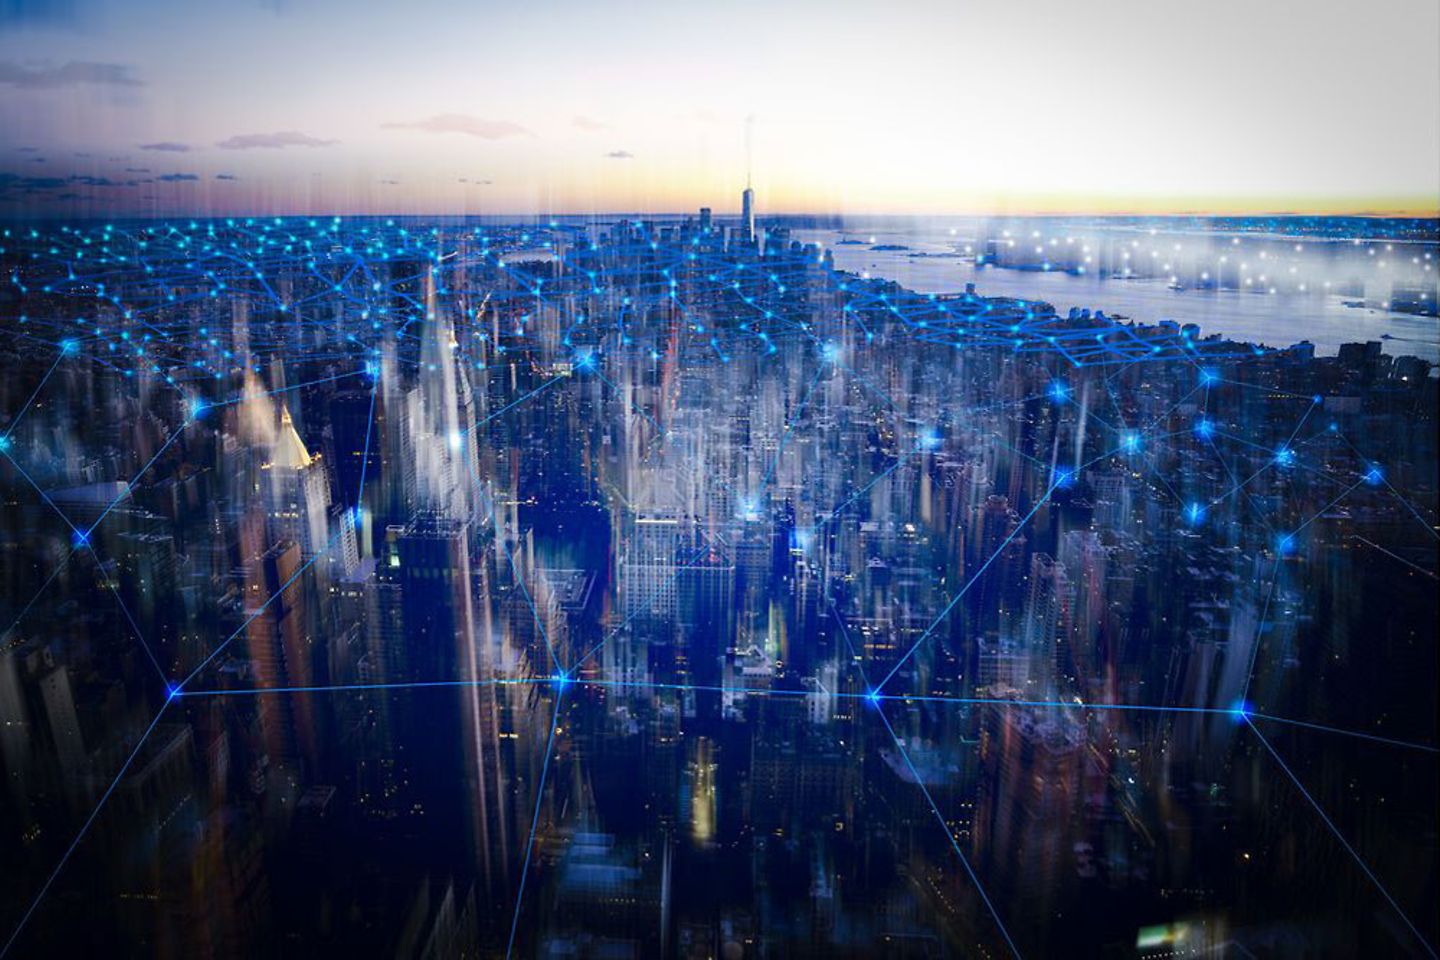 Virtual network symbolized with blue light points over city in the dusk